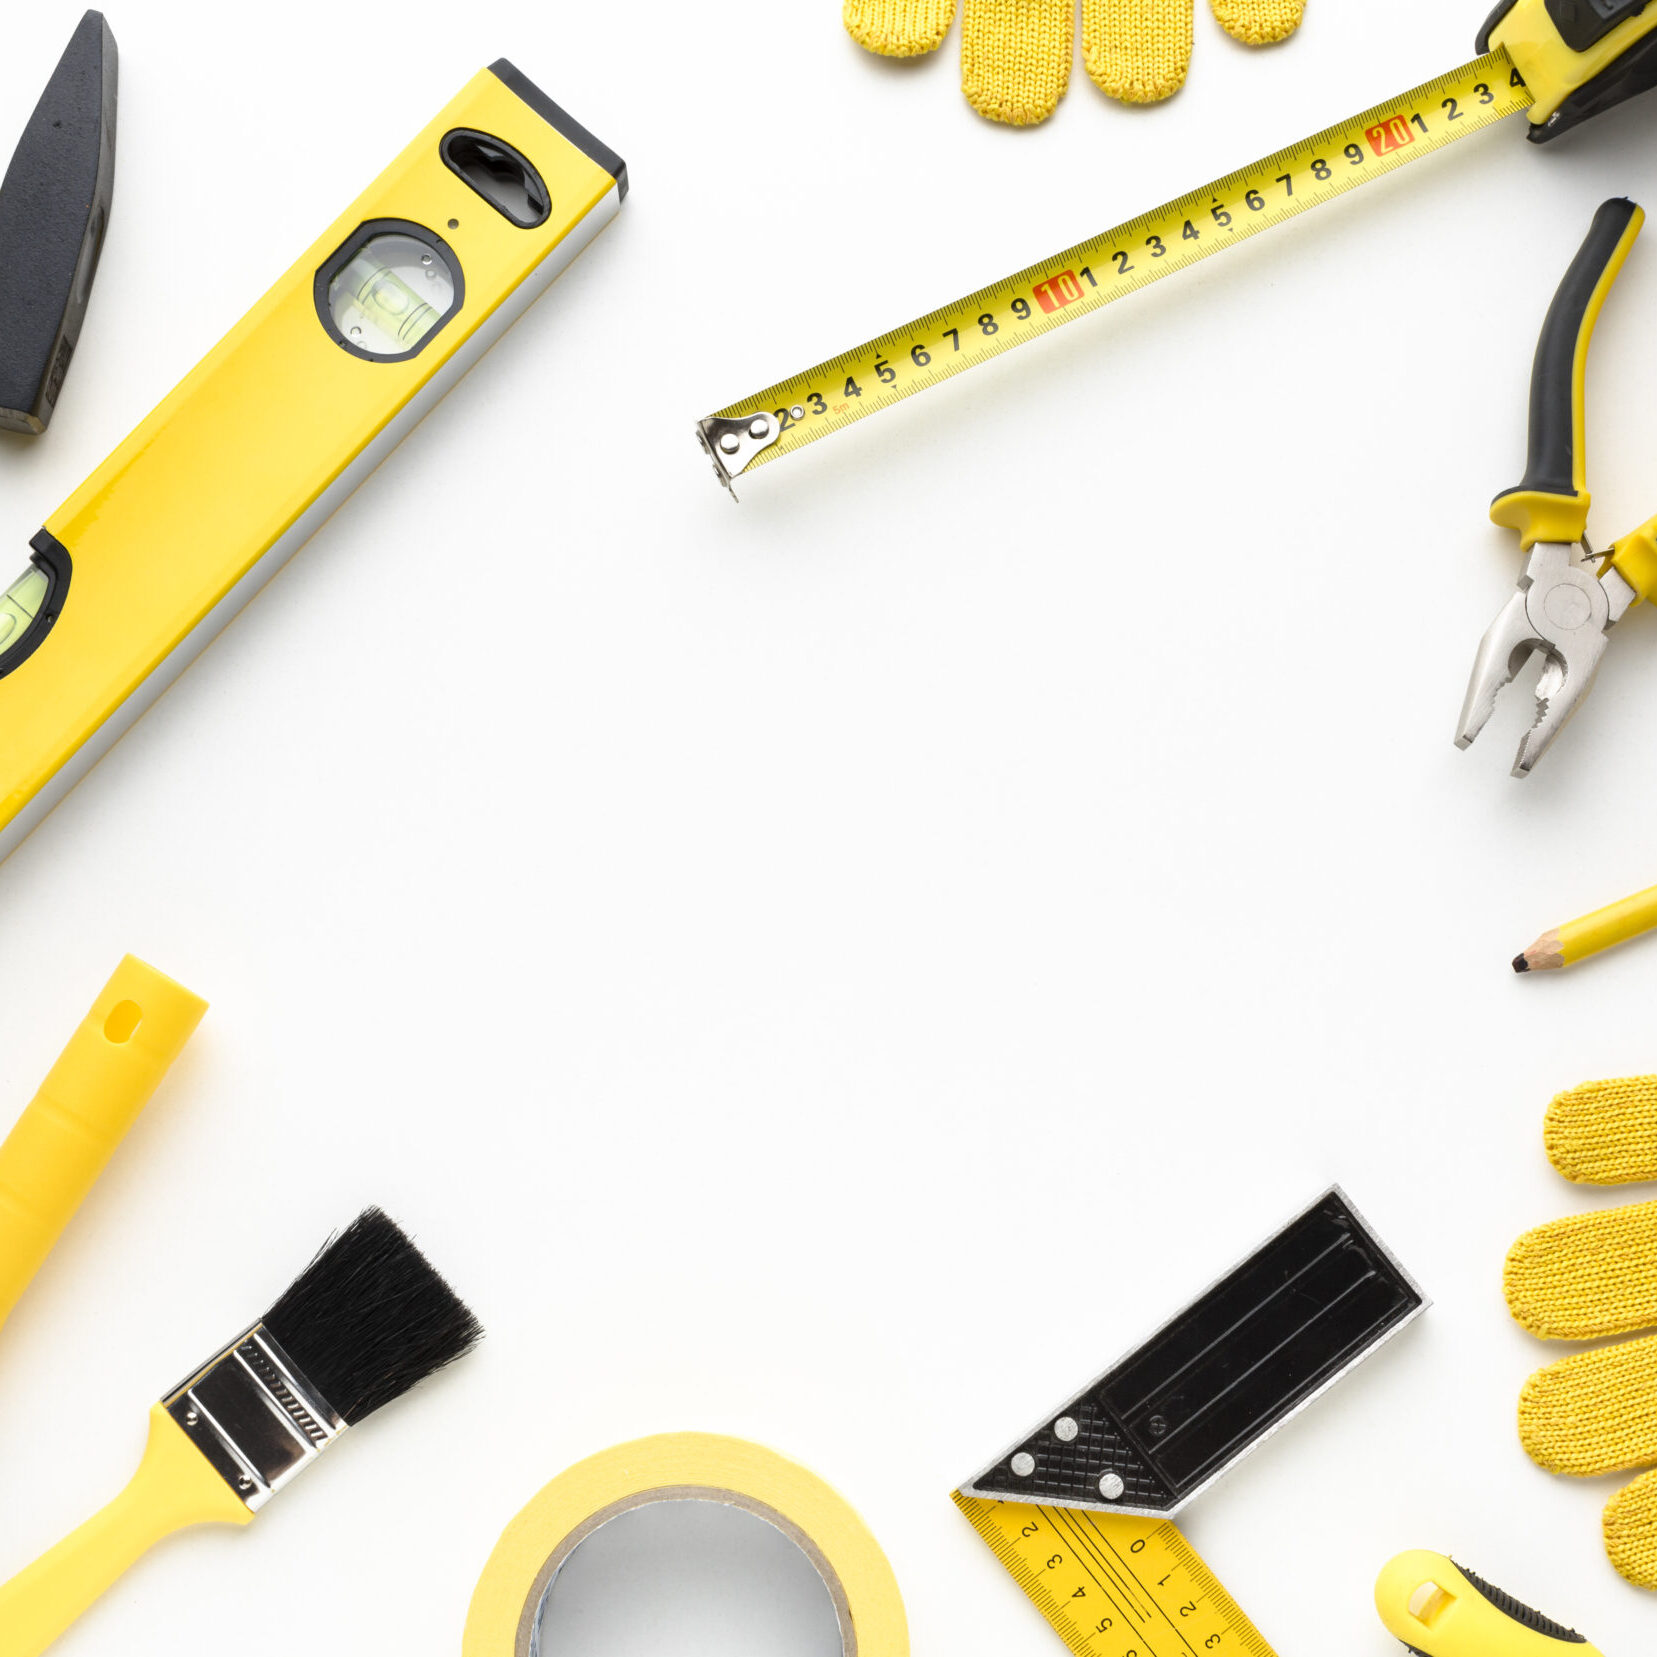 yellow-tools-frame-with-copy-space